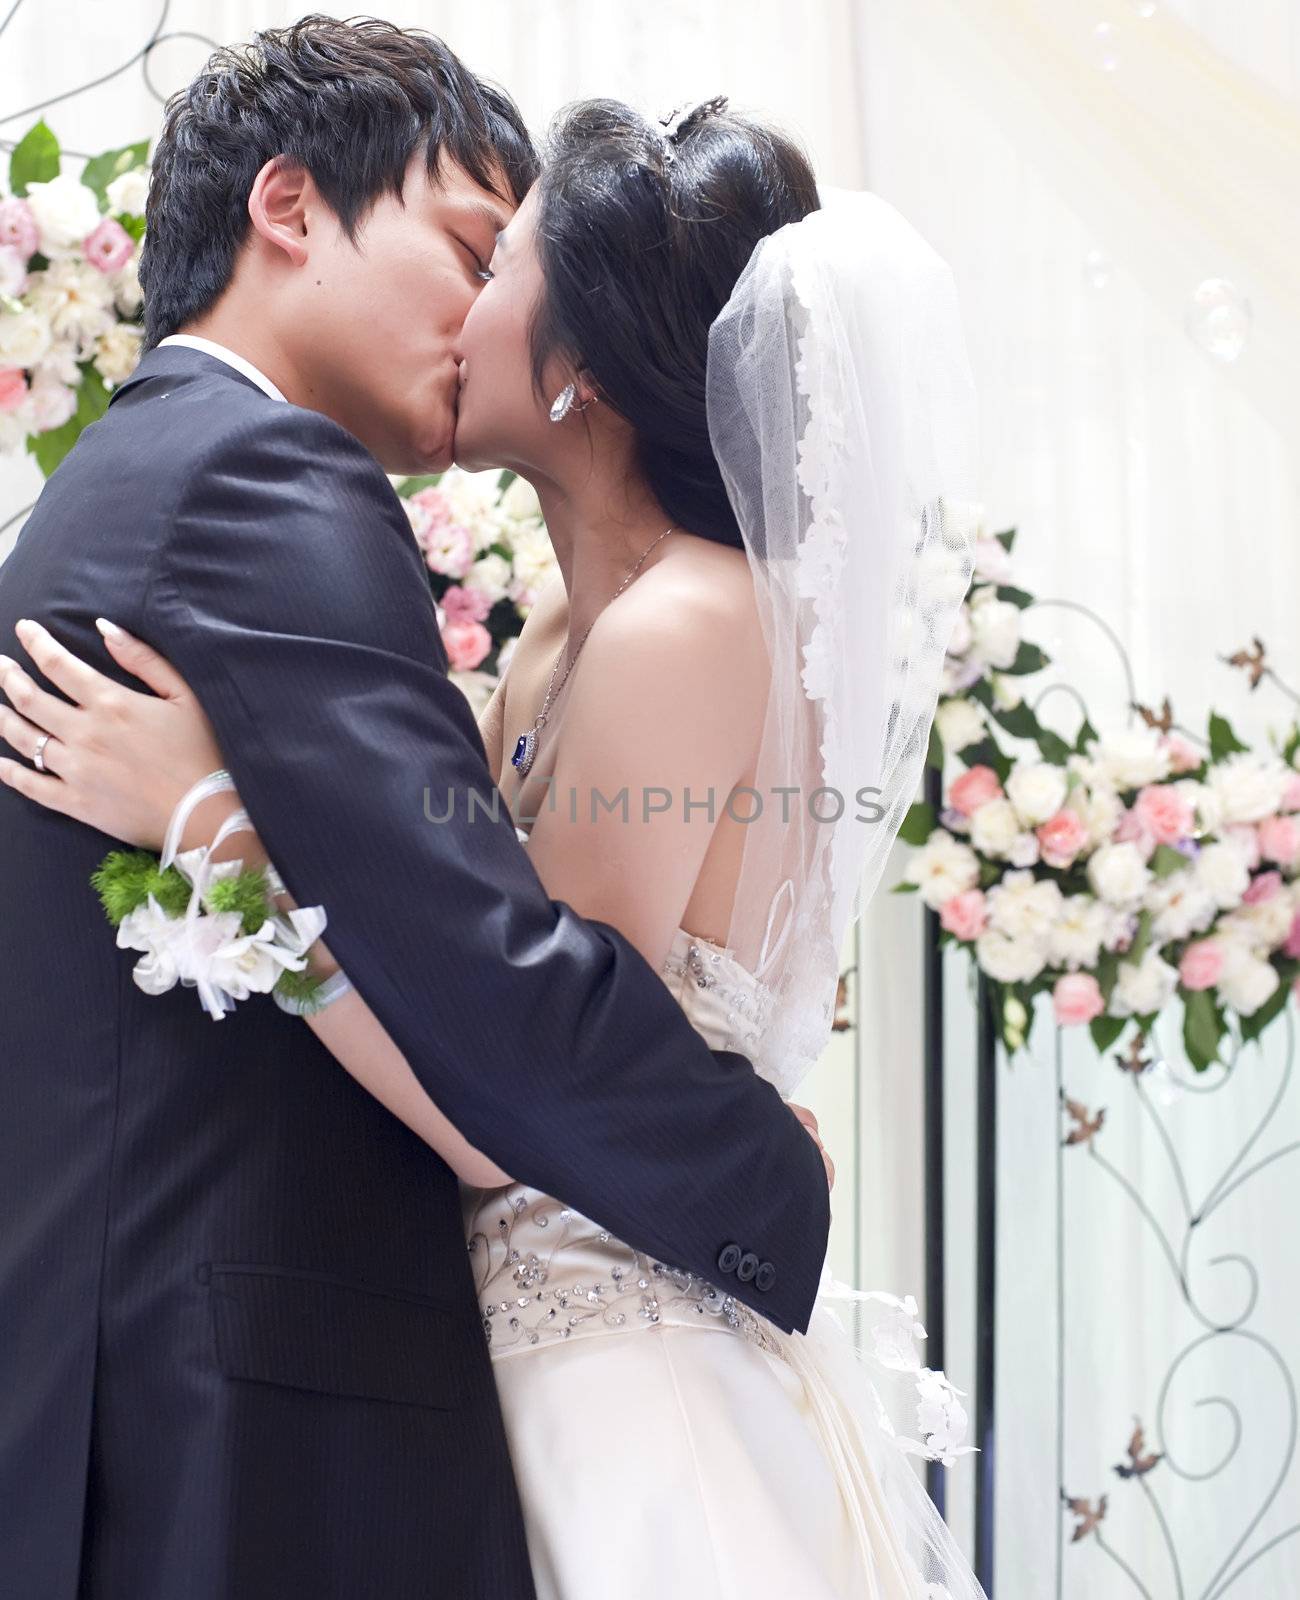 a young couple embracing and kissing on their wedding day